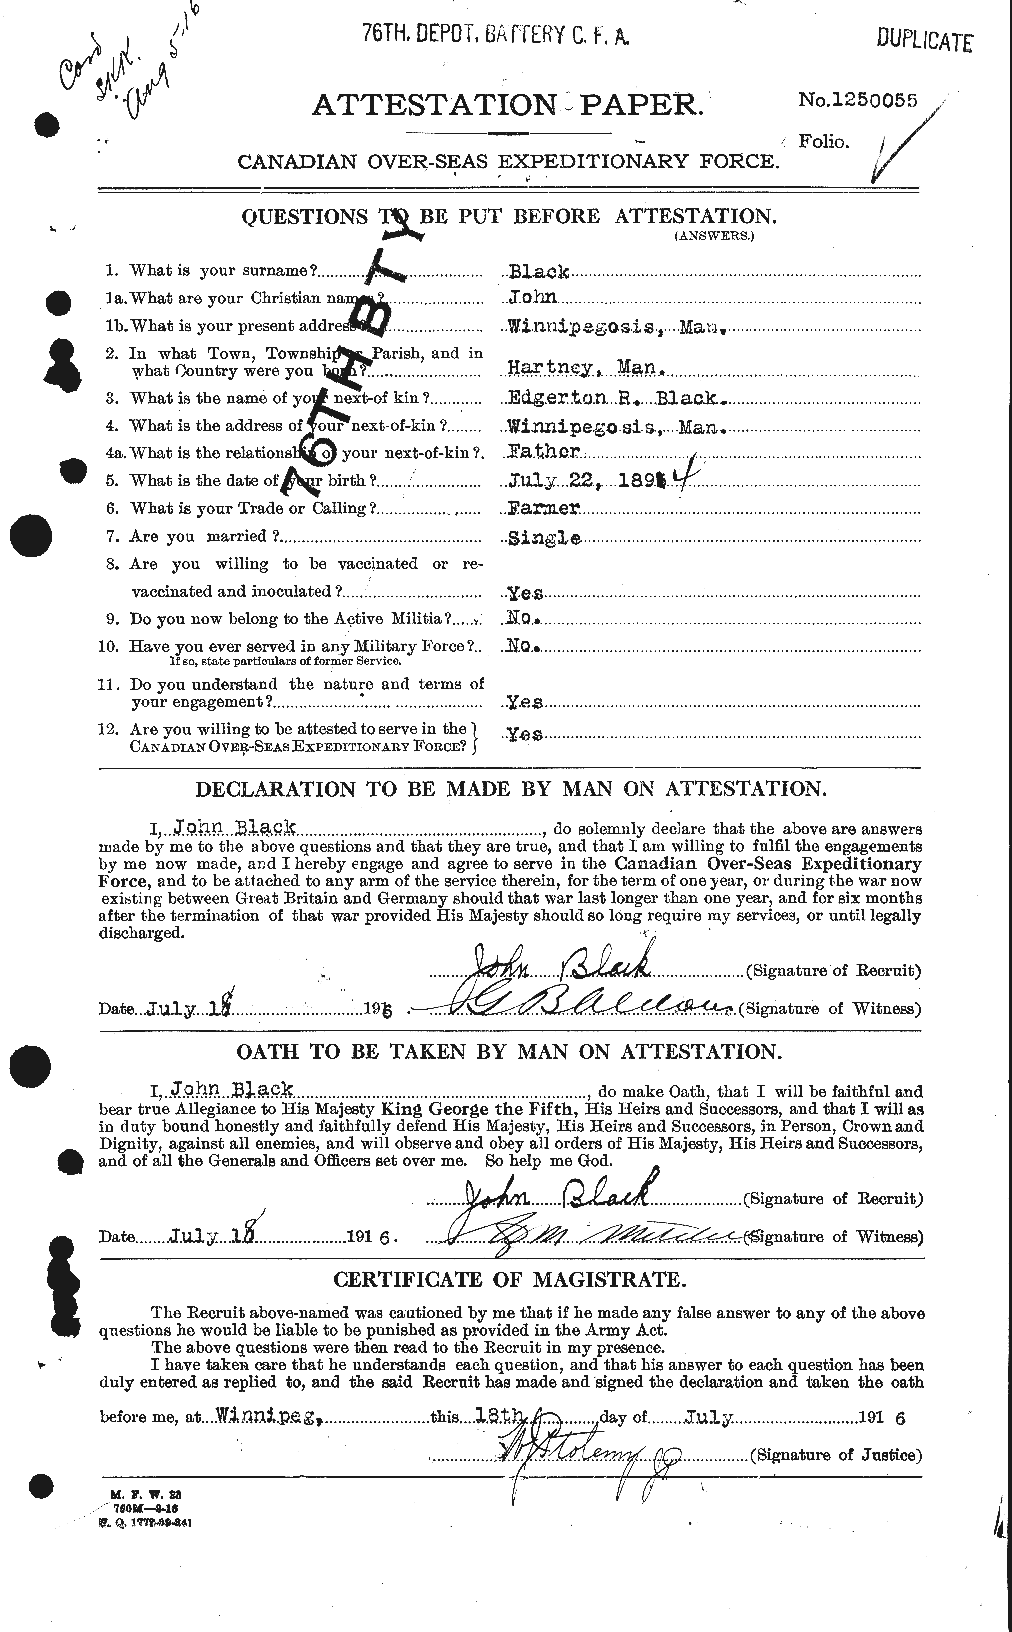 Personnel Records of the First World War - CEF 246899a